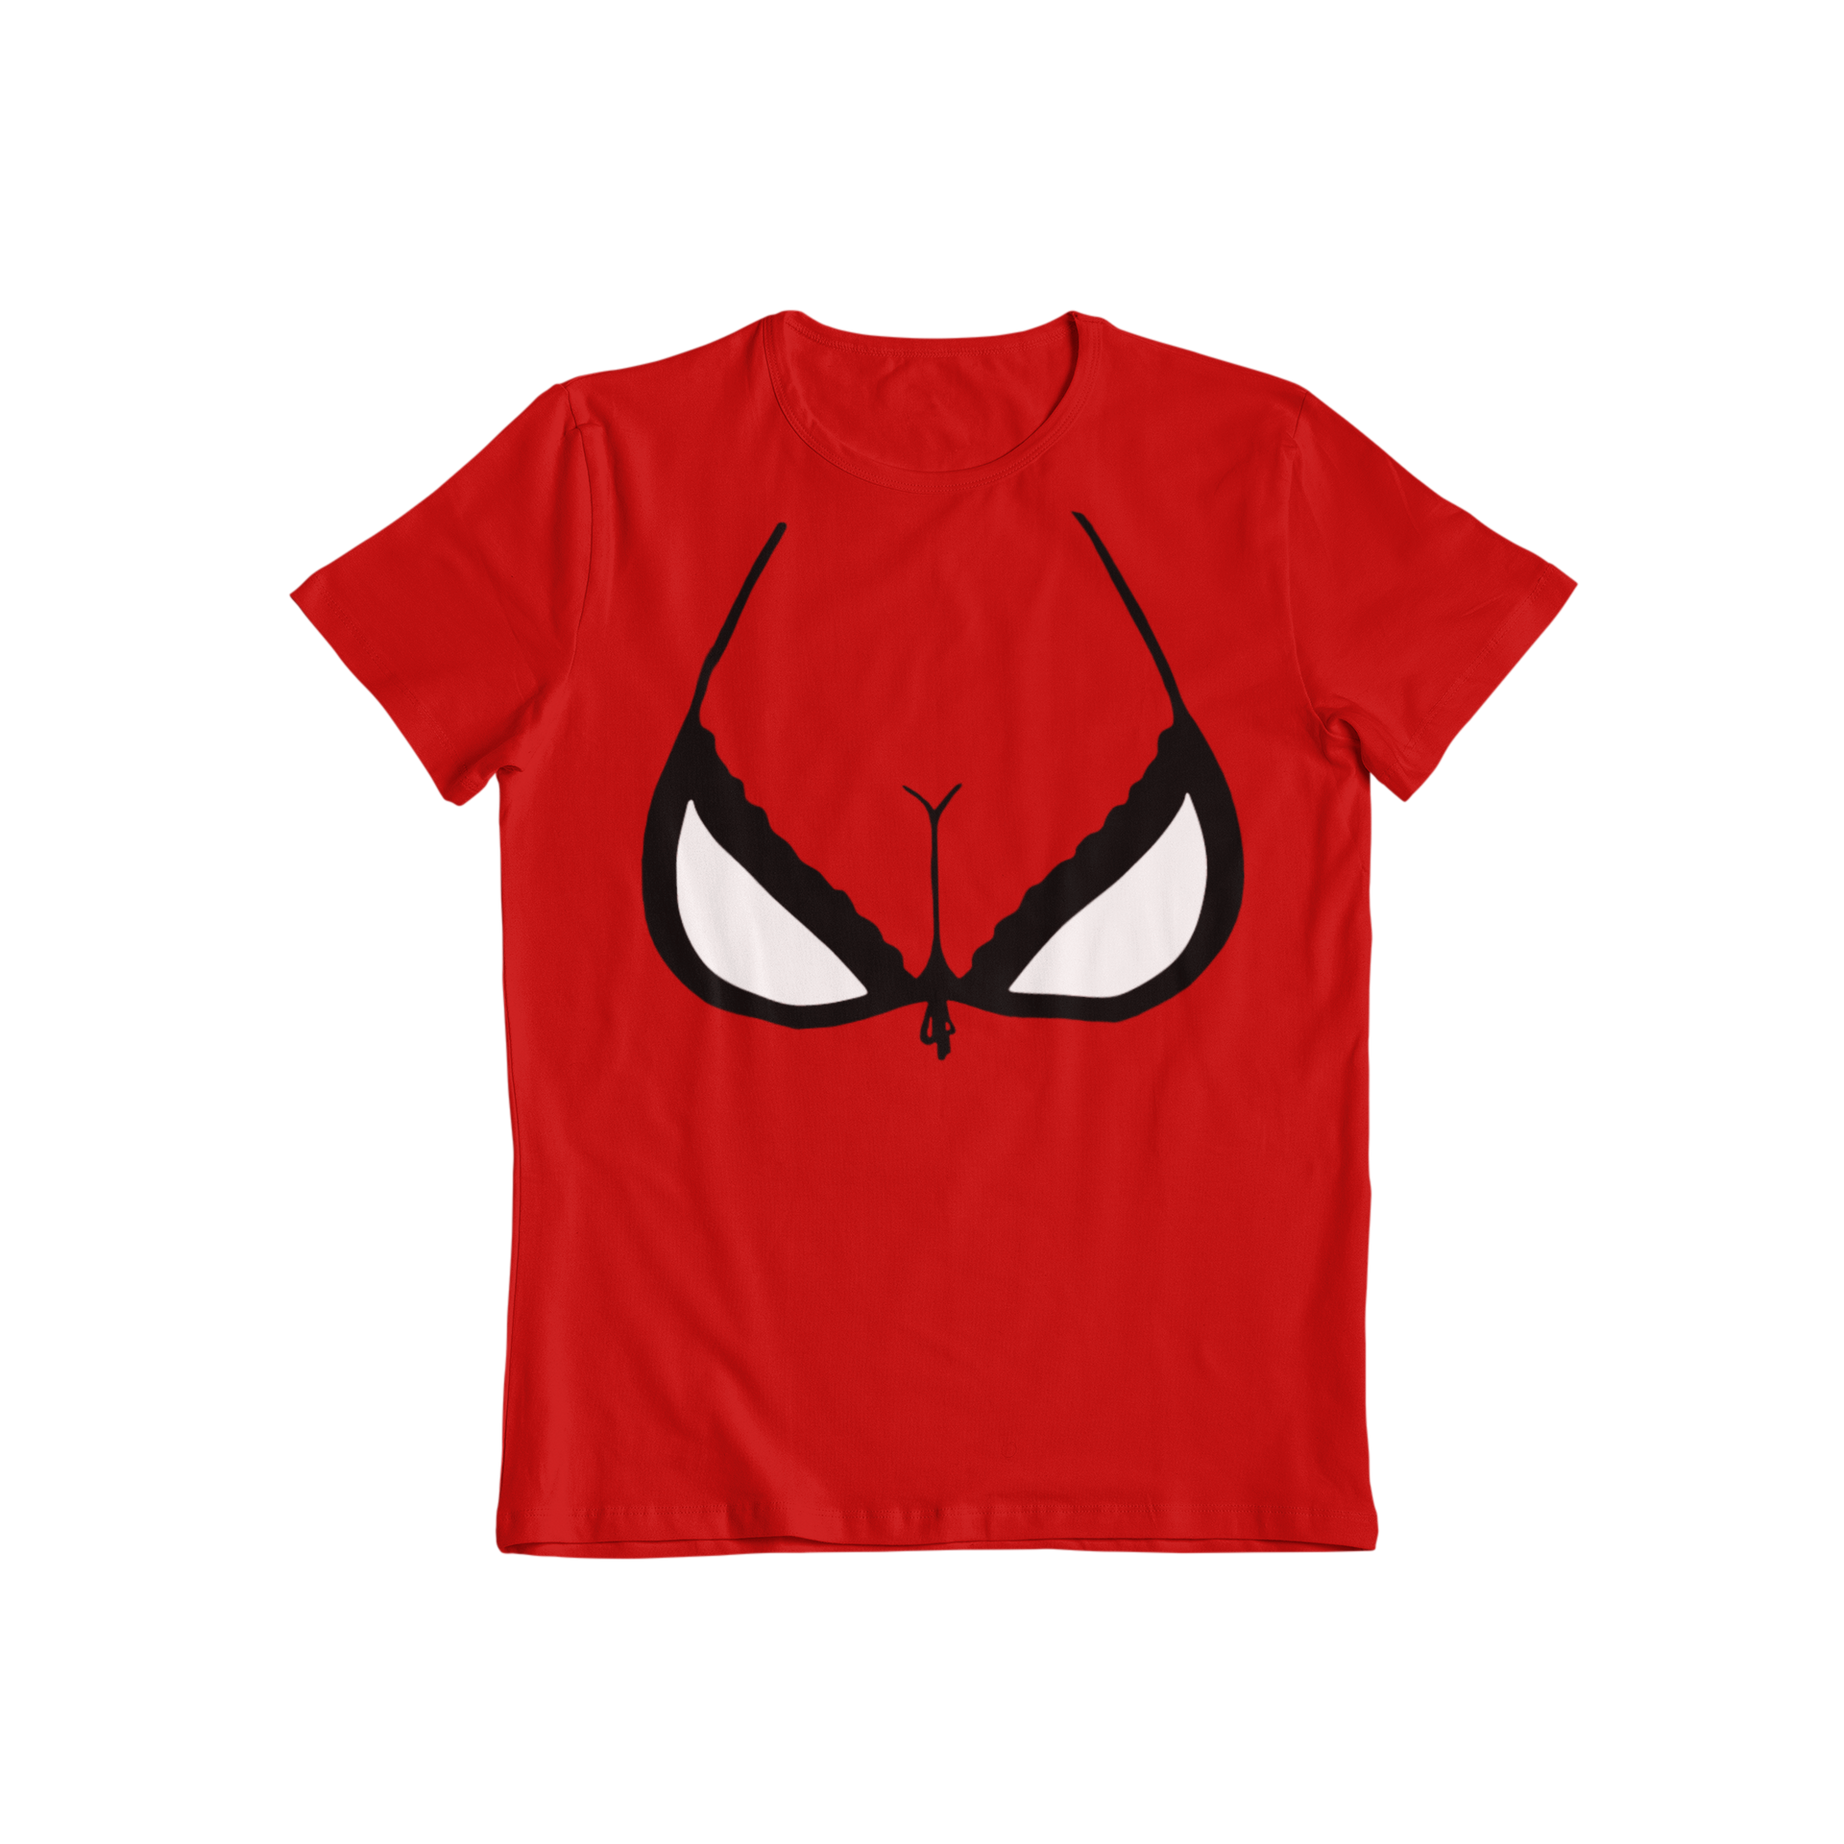 Teevolution offers a range of funny film graphic t-shirts. Stand out from the crowd with our unique designs, including the red and blue webslinger or a pair of boobs. Get yours now and start making people laugh!